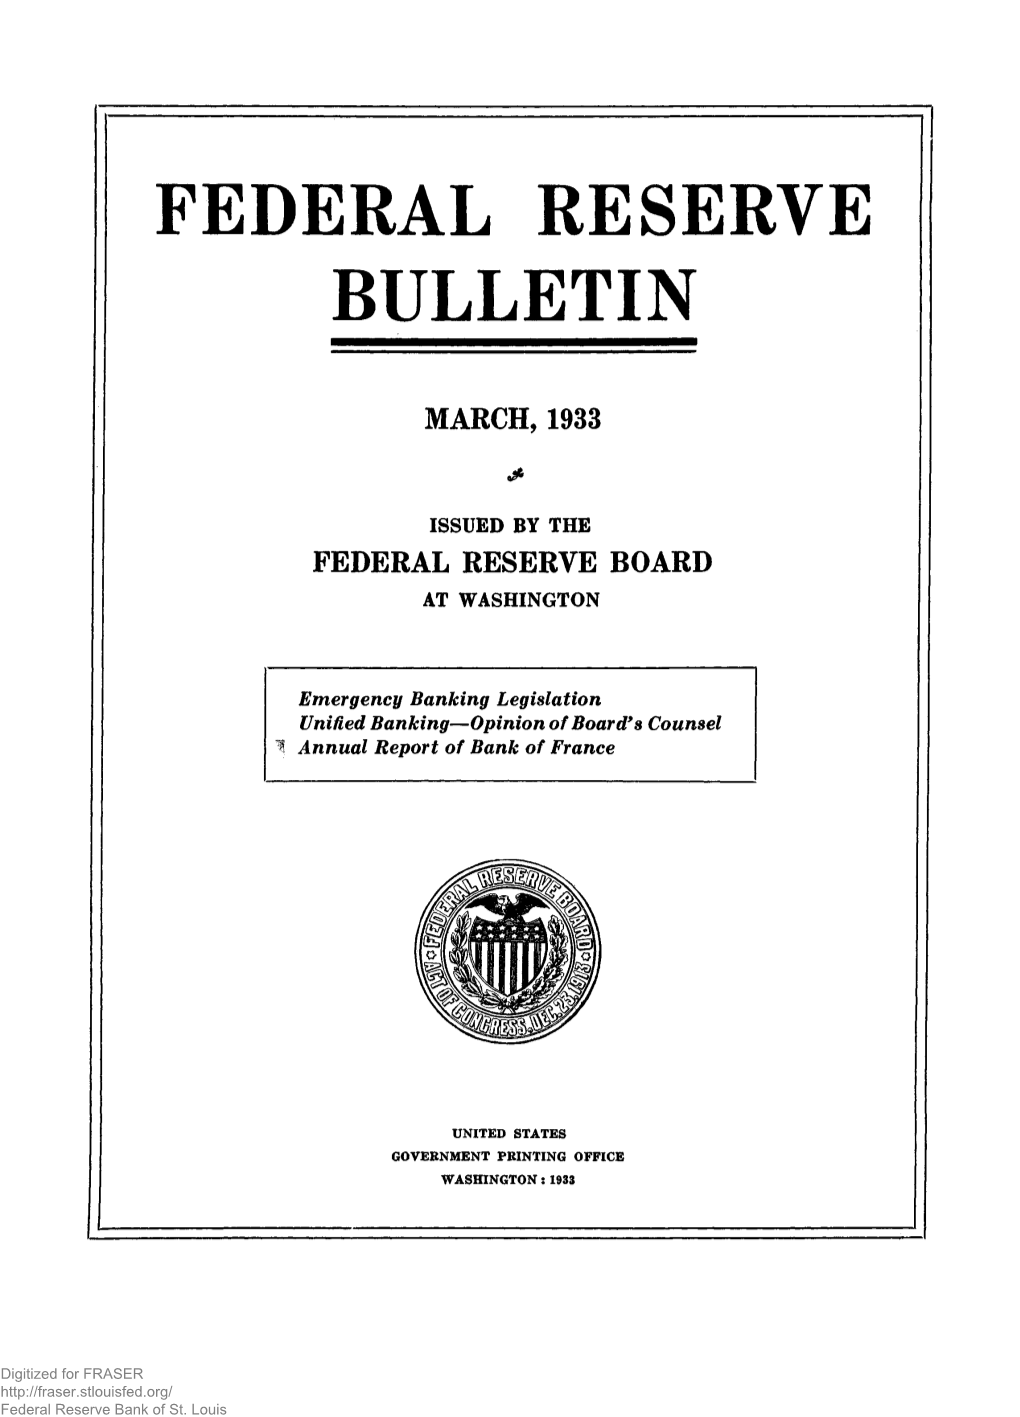 Federal Reserve Bulletin March 1933